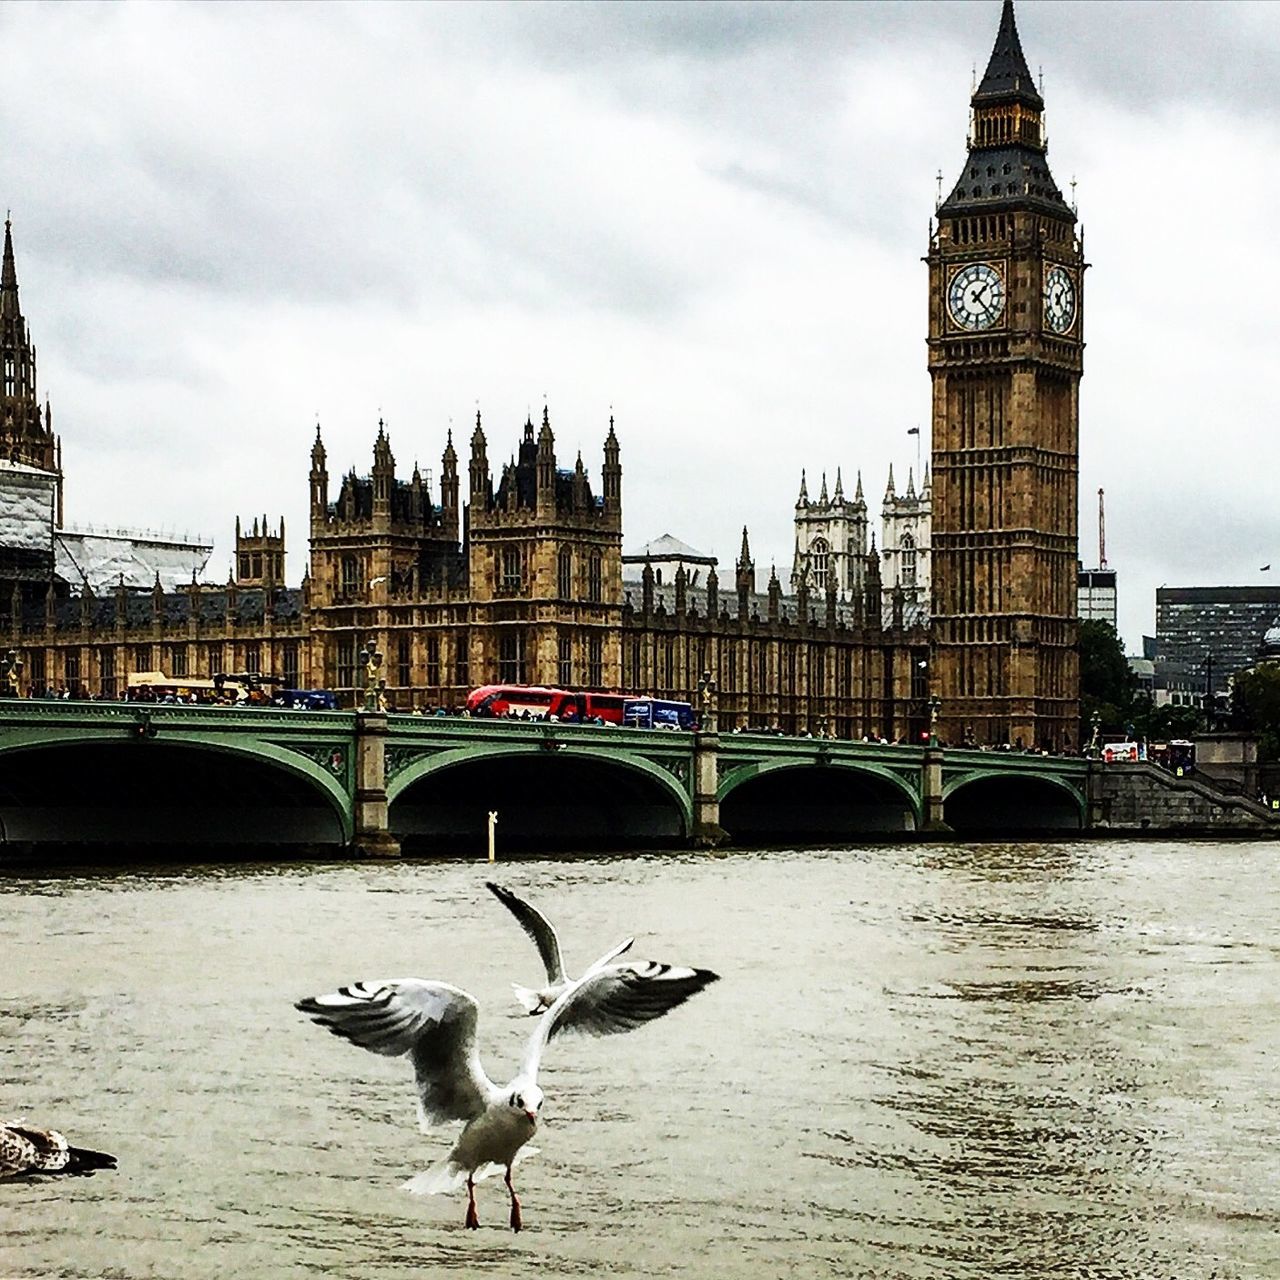 architecture, river, clock tower, water, bridge - man made structure, built structure, building exterior, bird, animal themes, travel destinations, connection, day, sky, cloud - sky, riverbank, animals in the wild, outdoors, no people, city